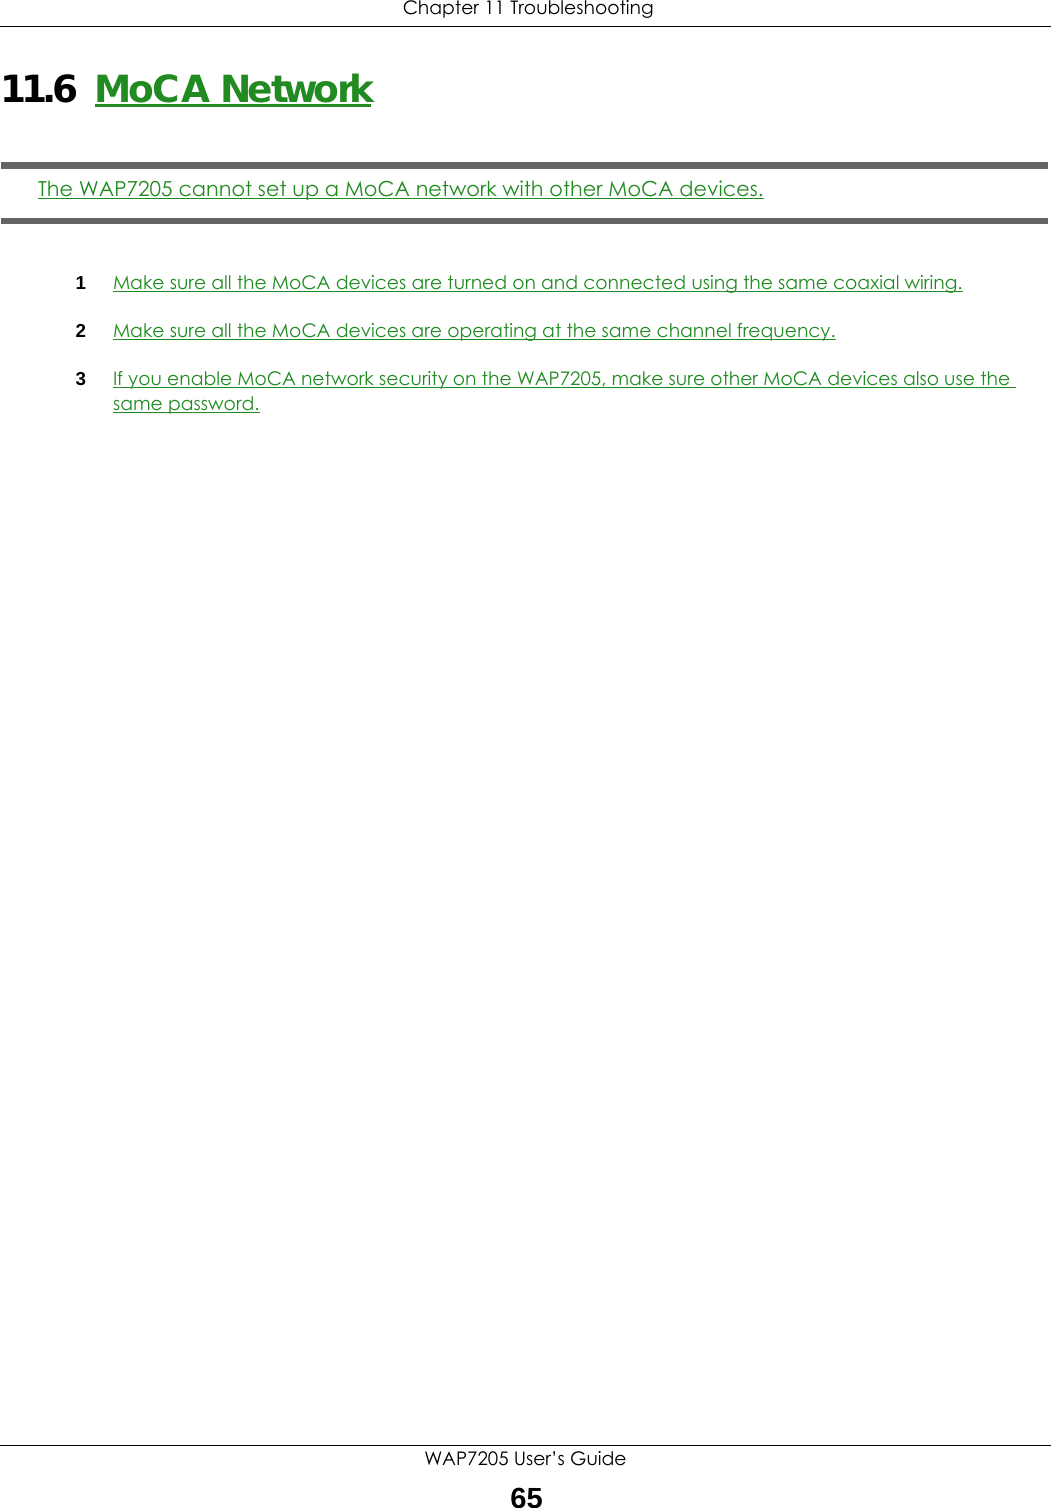  Chapter 11 TroubleshootingWAP7205 User’s Guide6511.6  MoCA NetworkThe WAP7205 cannot set up a MoCA network with other MoCA devices.1Make sure all the MoCA devices are turned on and connected using the same coaxial wiring.2Make sure all the MoCA devices are operating at the same channel frequency.3If you enable MoCA network security on the WAP7205, make sure other MoCA devices also use the same password.